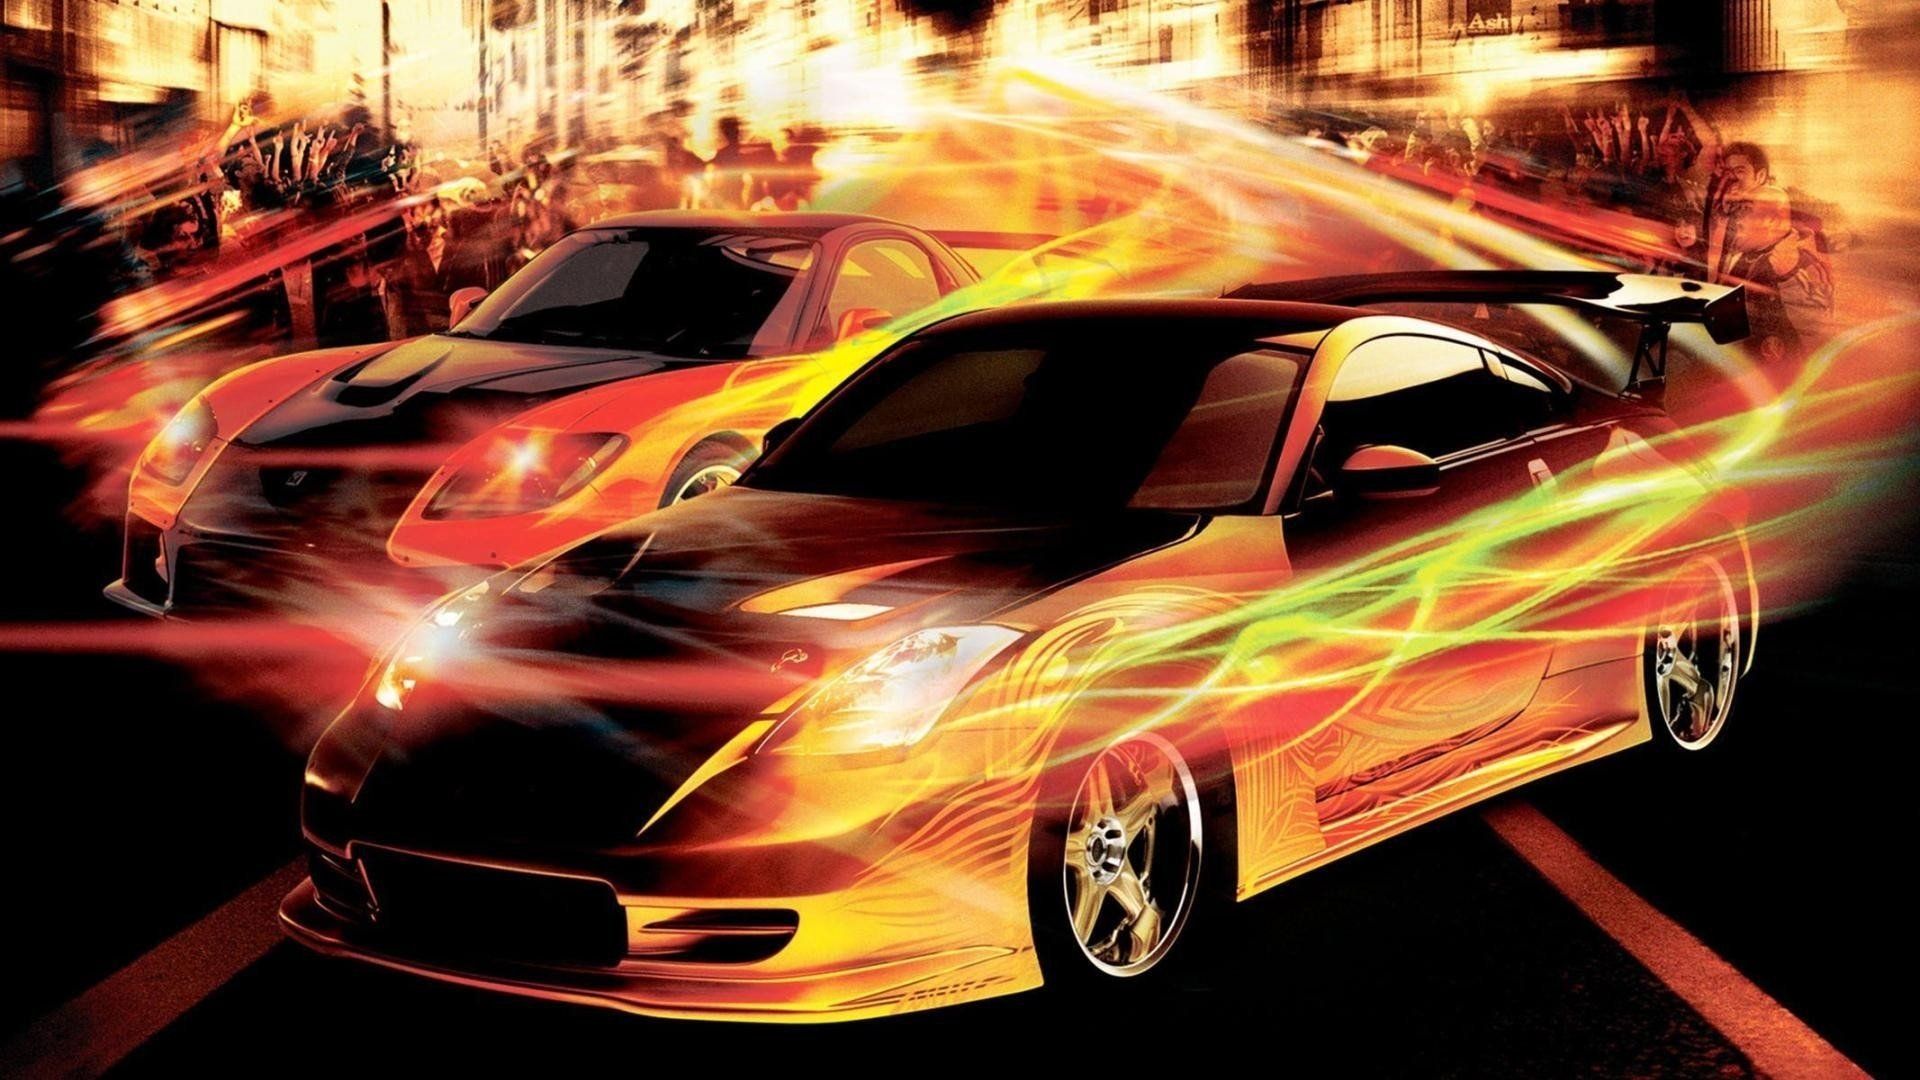 The Fast And The Furious: Tokyo Drift HD Wallpaper. Background